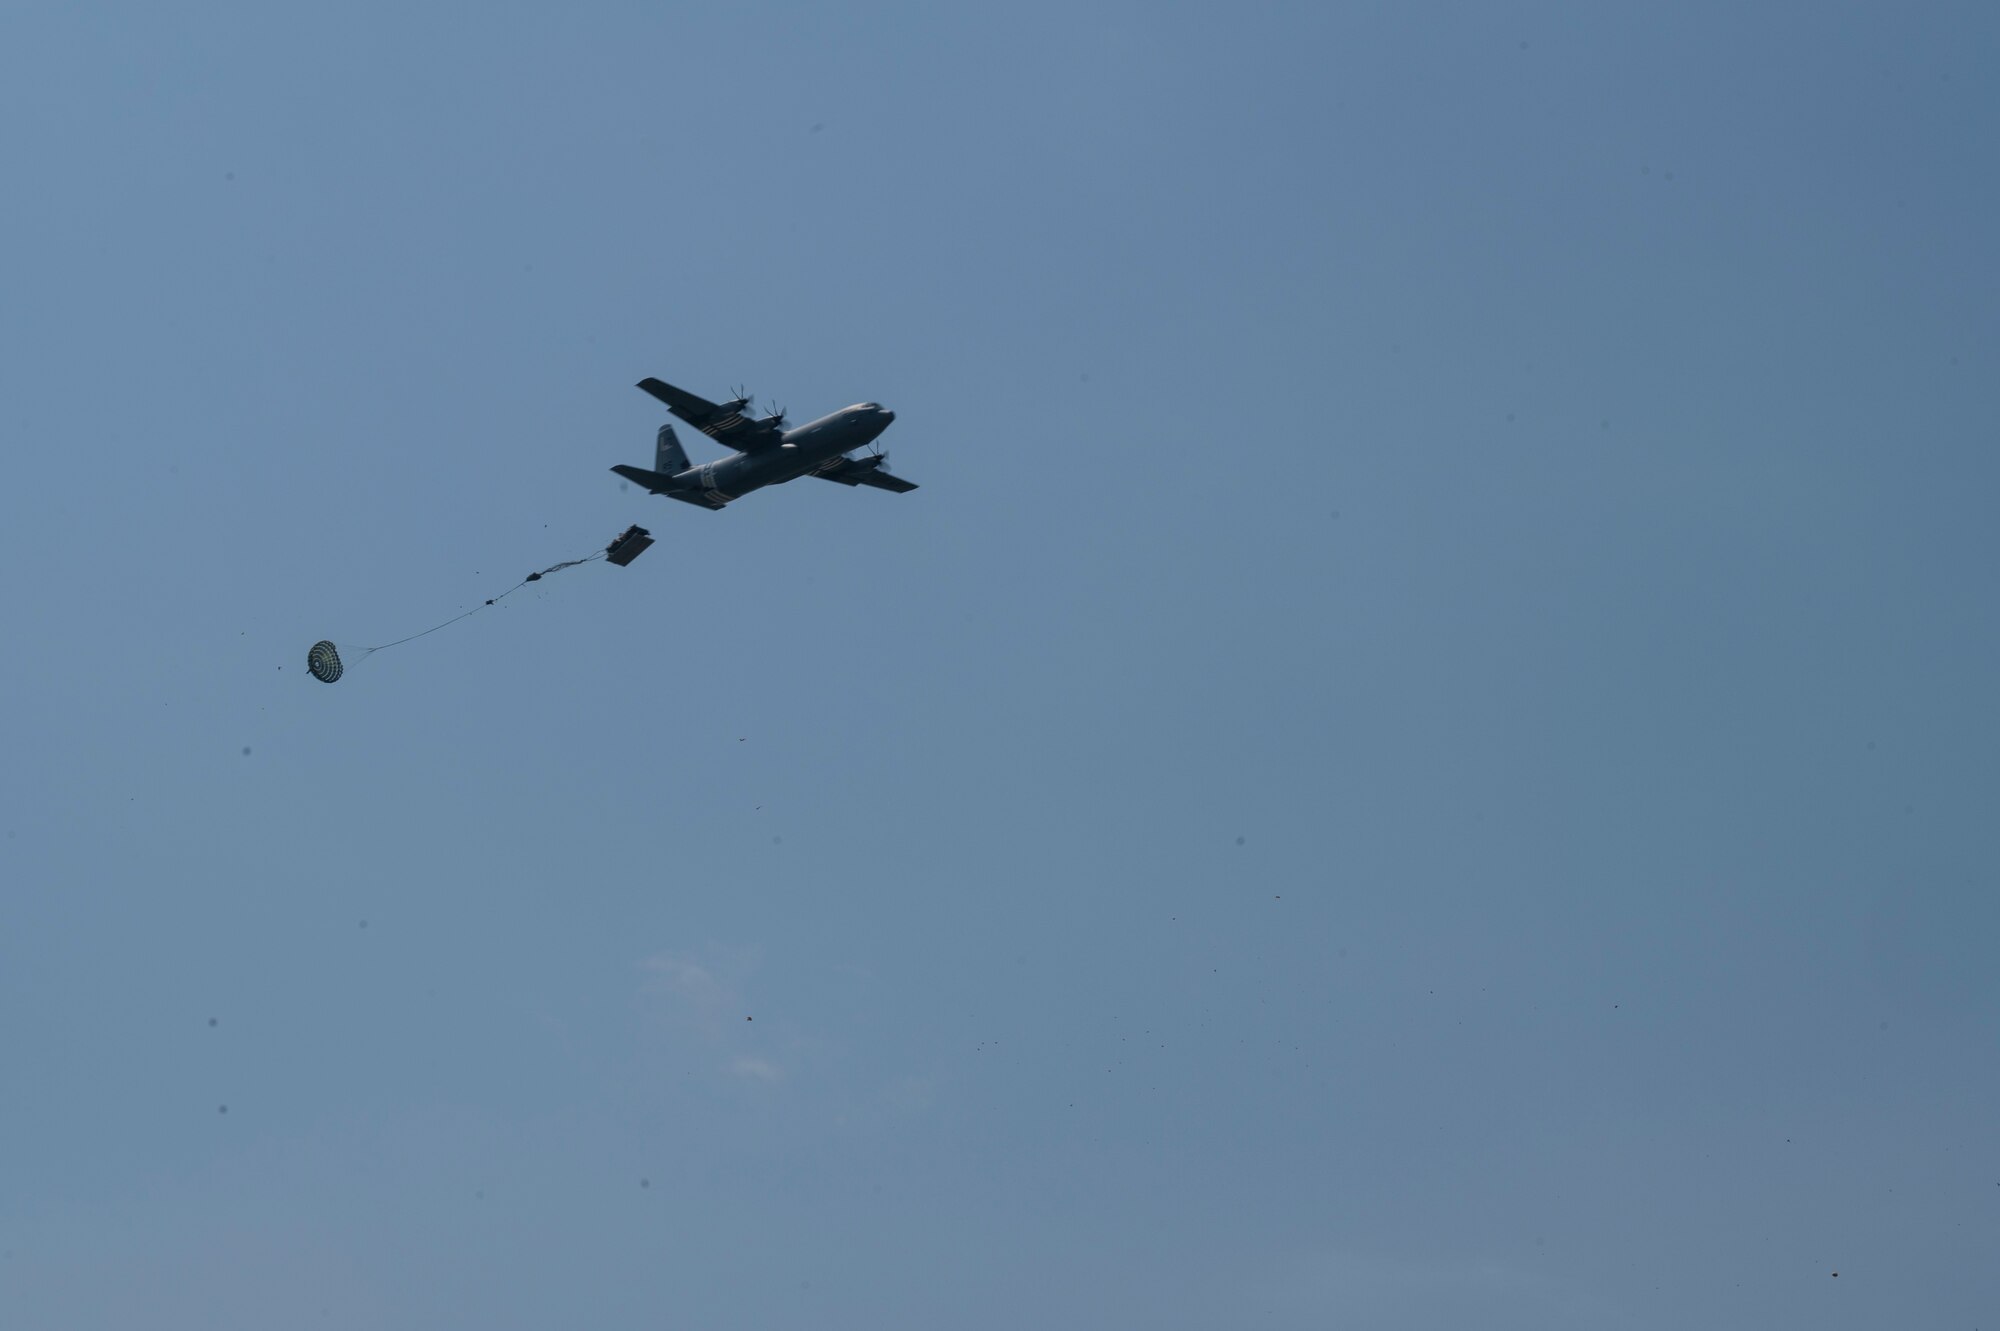 A U.S. Air Force C-130J Super Hercules aircraft drops heavy cargo onto a dropzone during exercise Agile Spirit 21